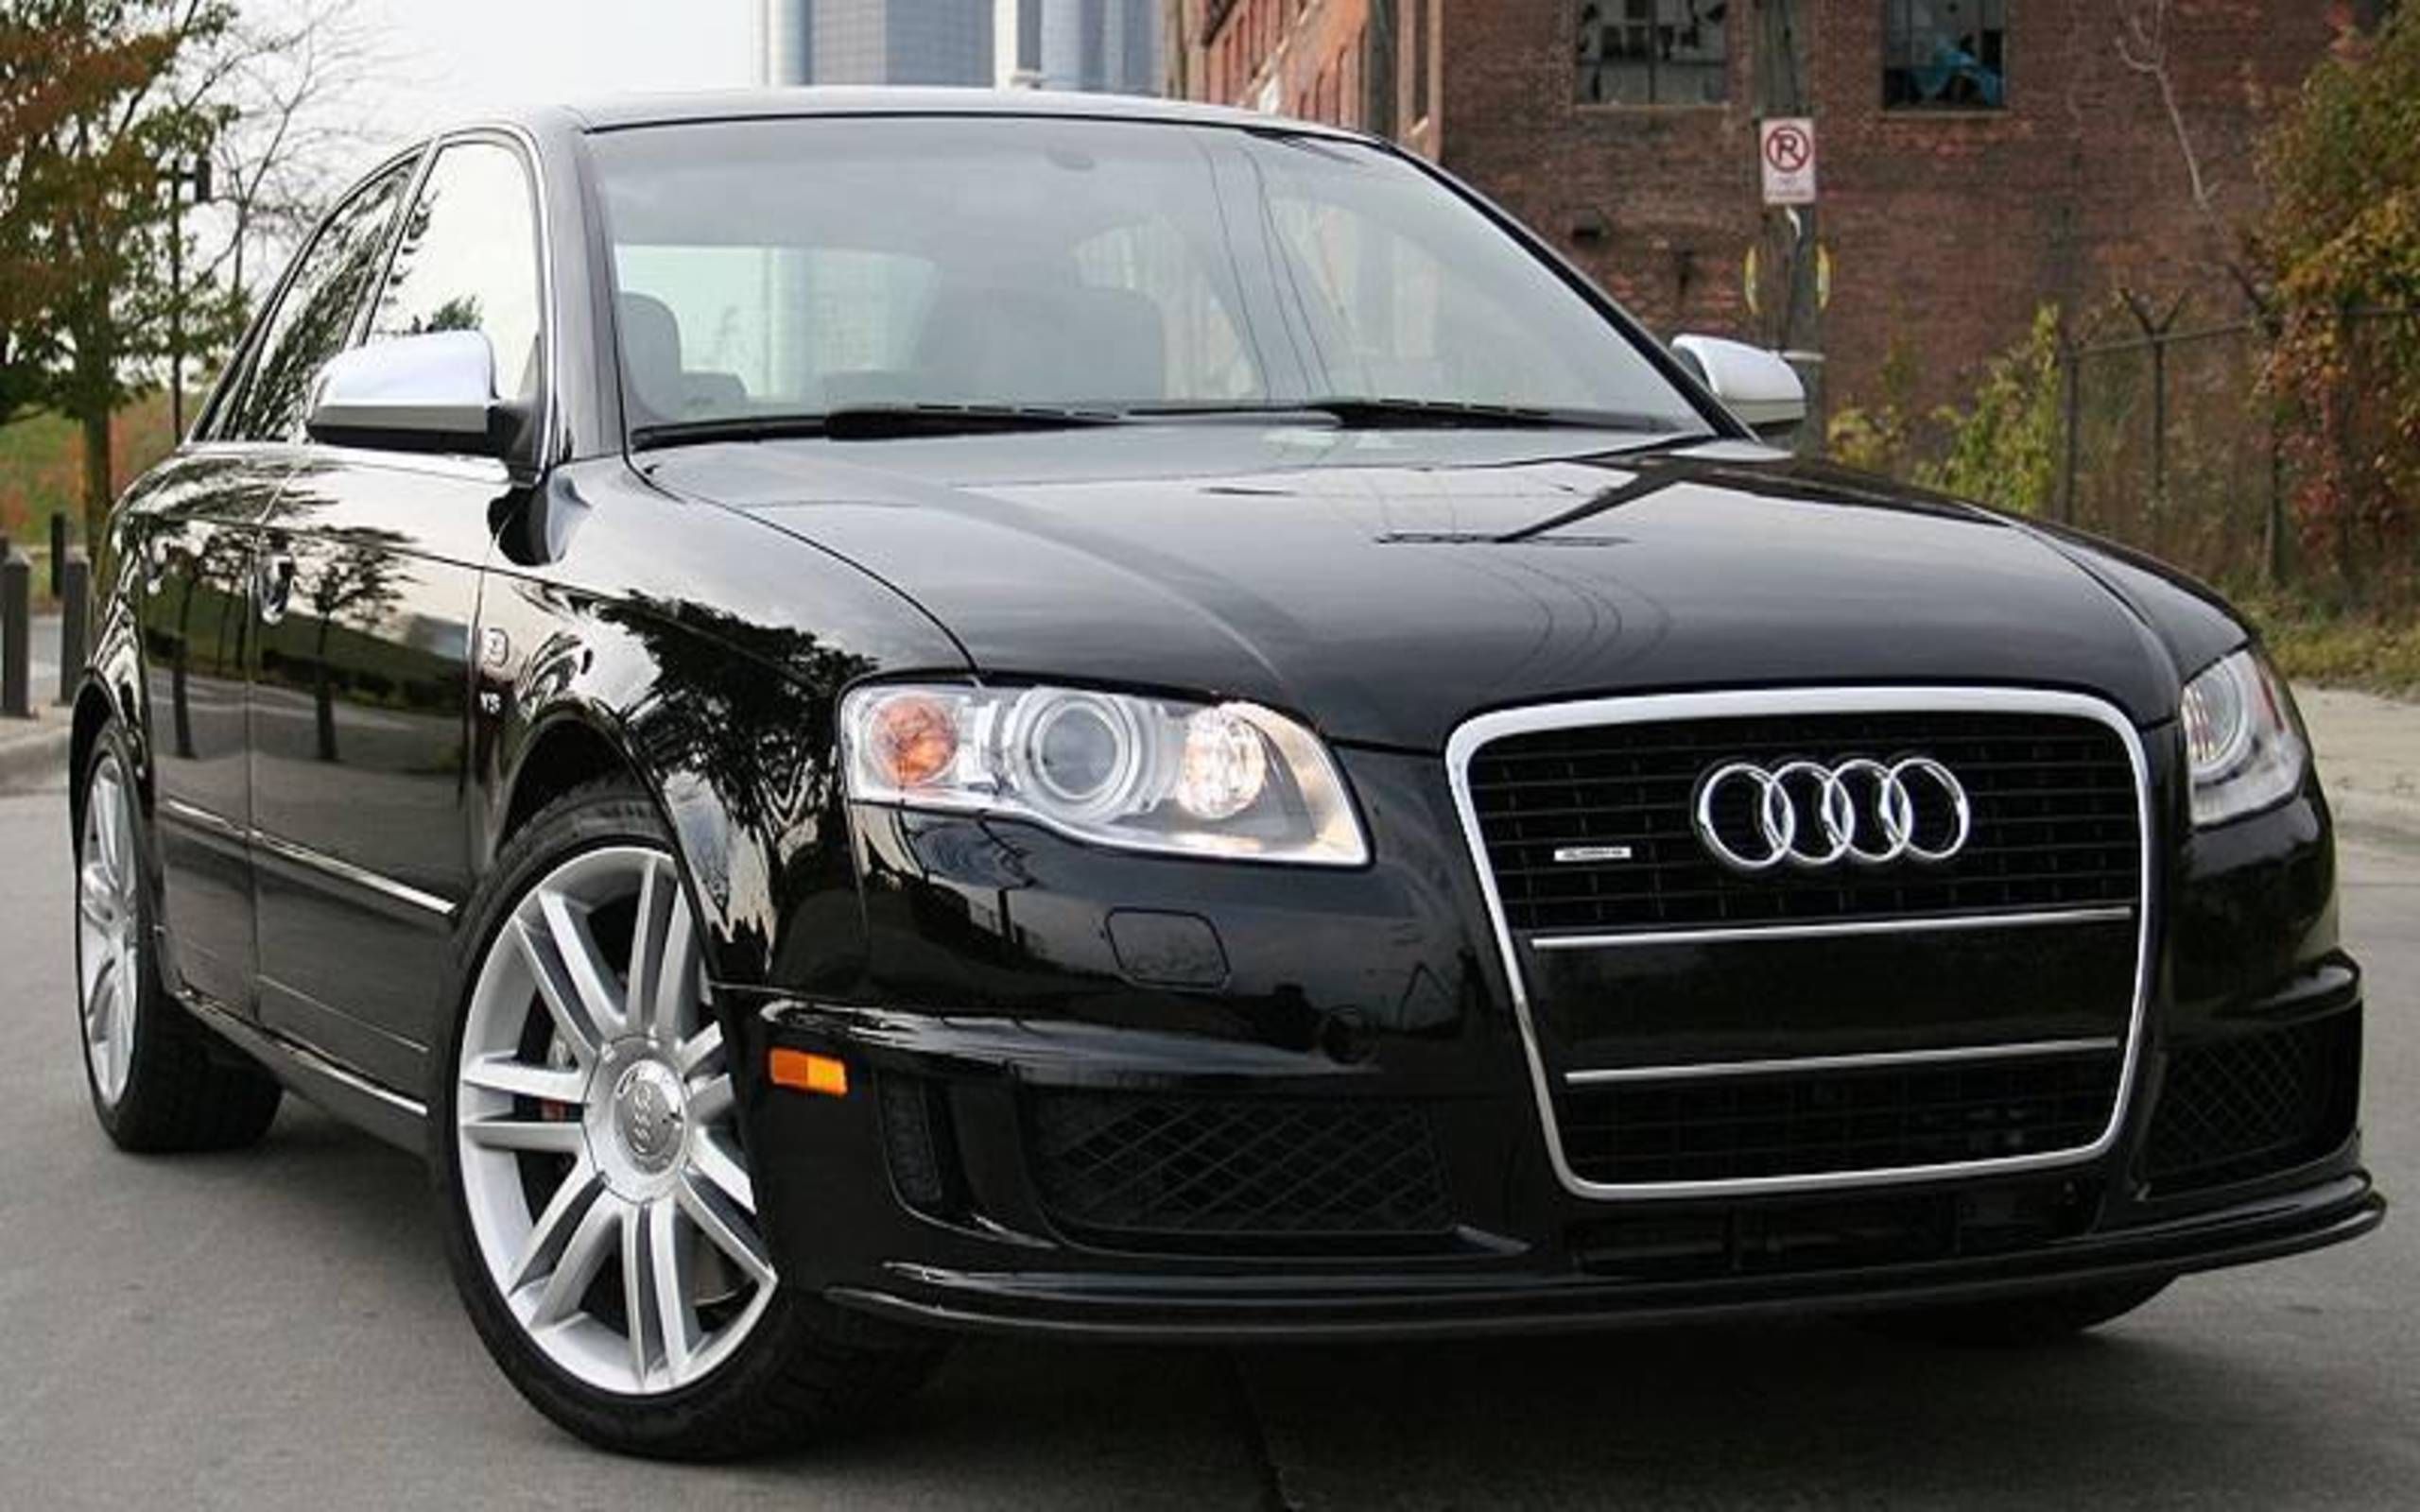 DRIVER'S LOG: 2007 Audi S4: All the fun at less cost